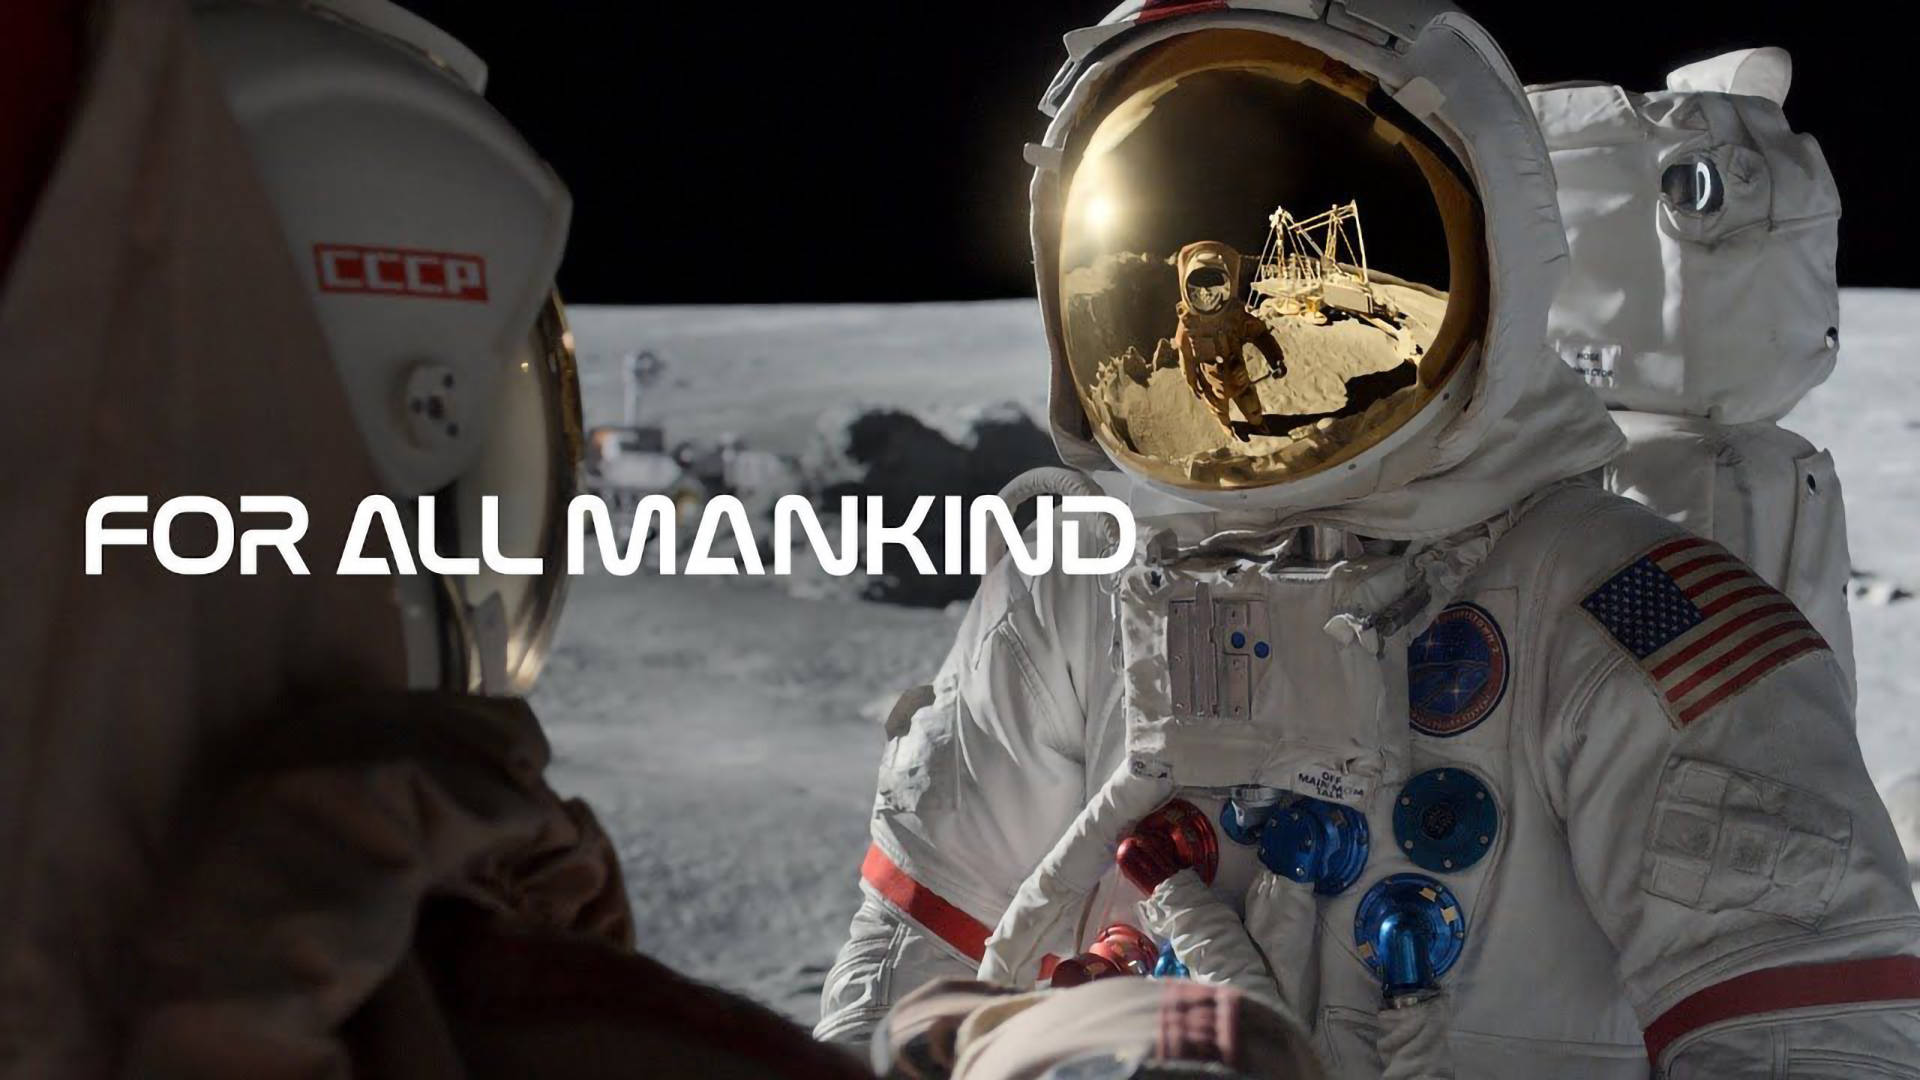 For All Mankind Two Astronauts On Moon